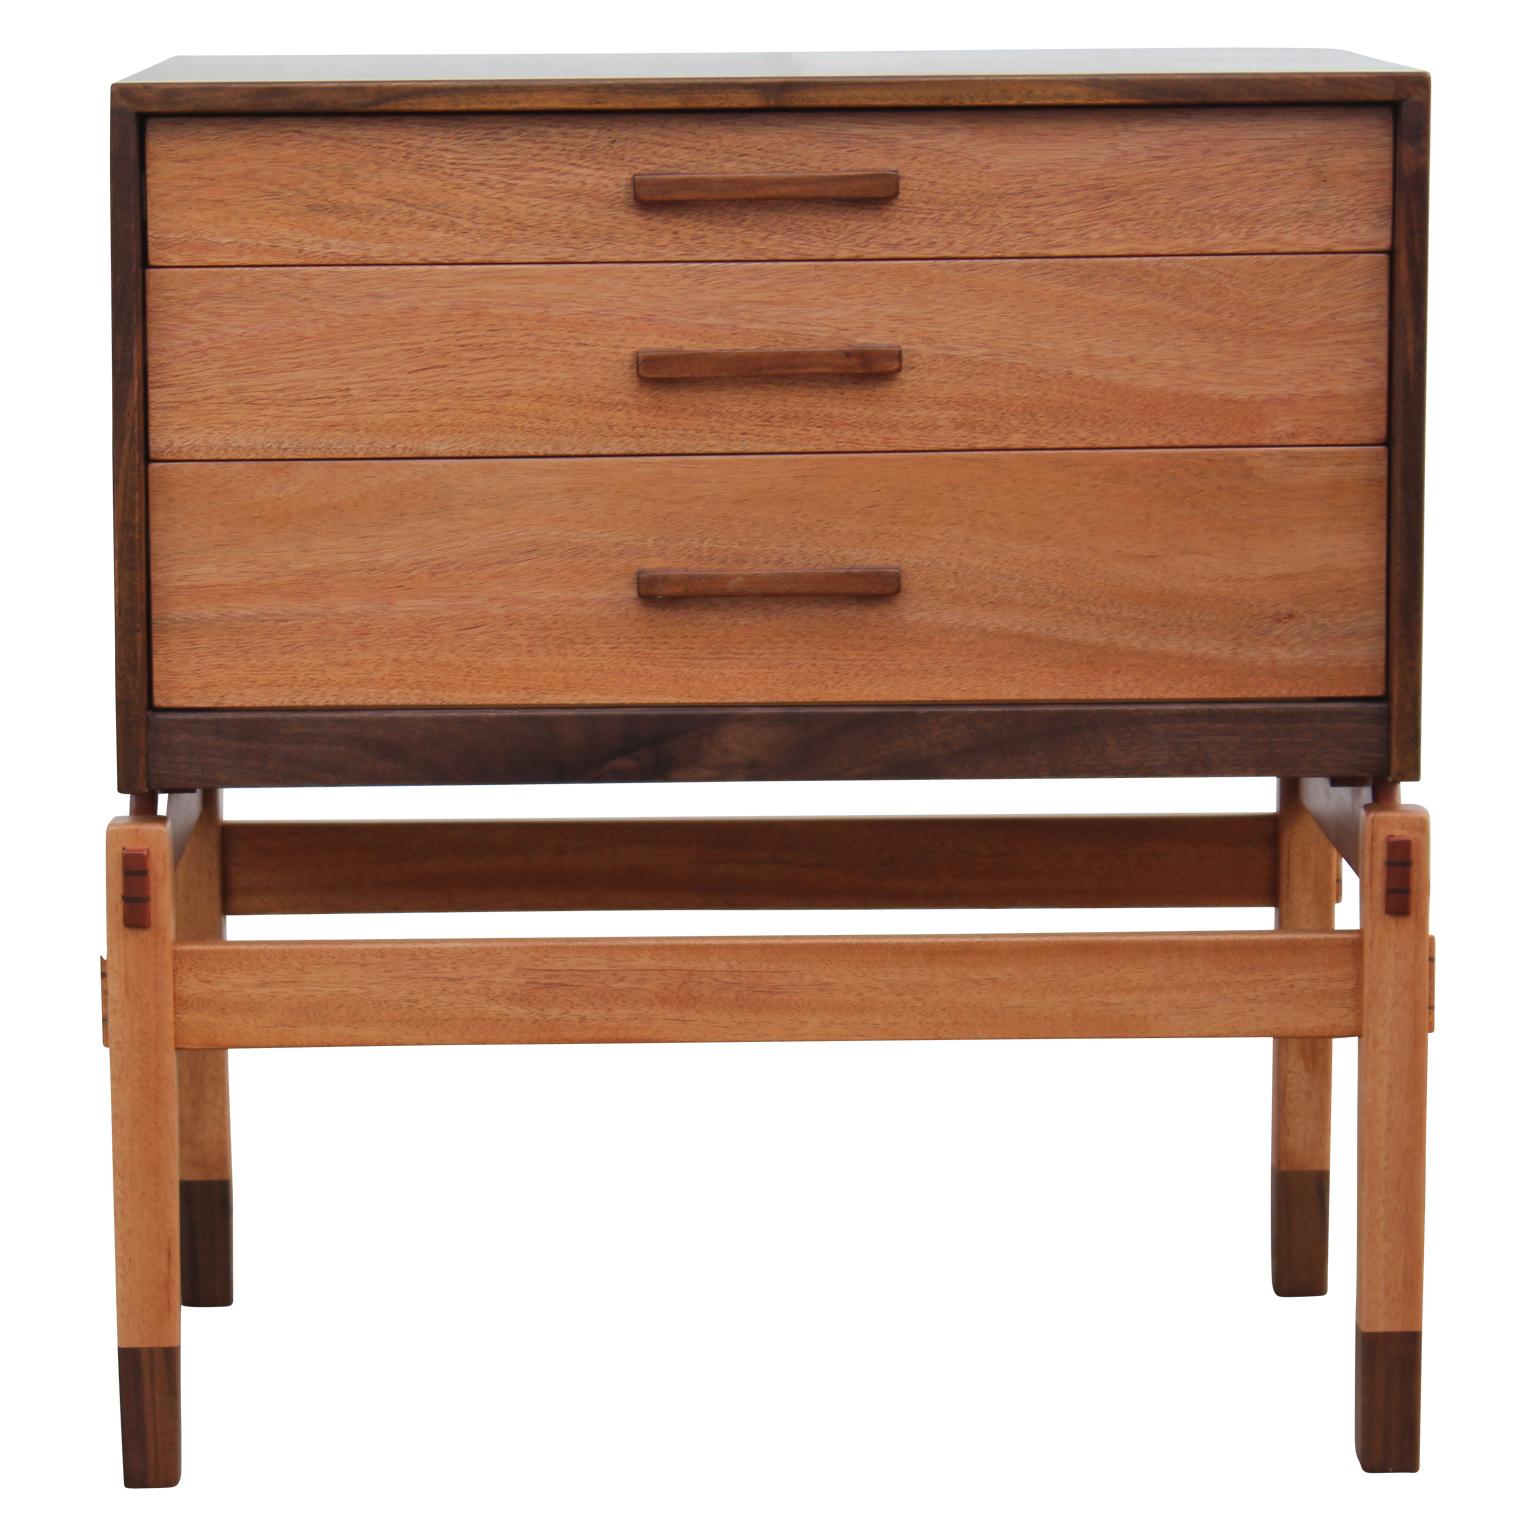 Modern Danish Style Two Tone Walnut Nightstand / Small Chest by Norm Stoeker